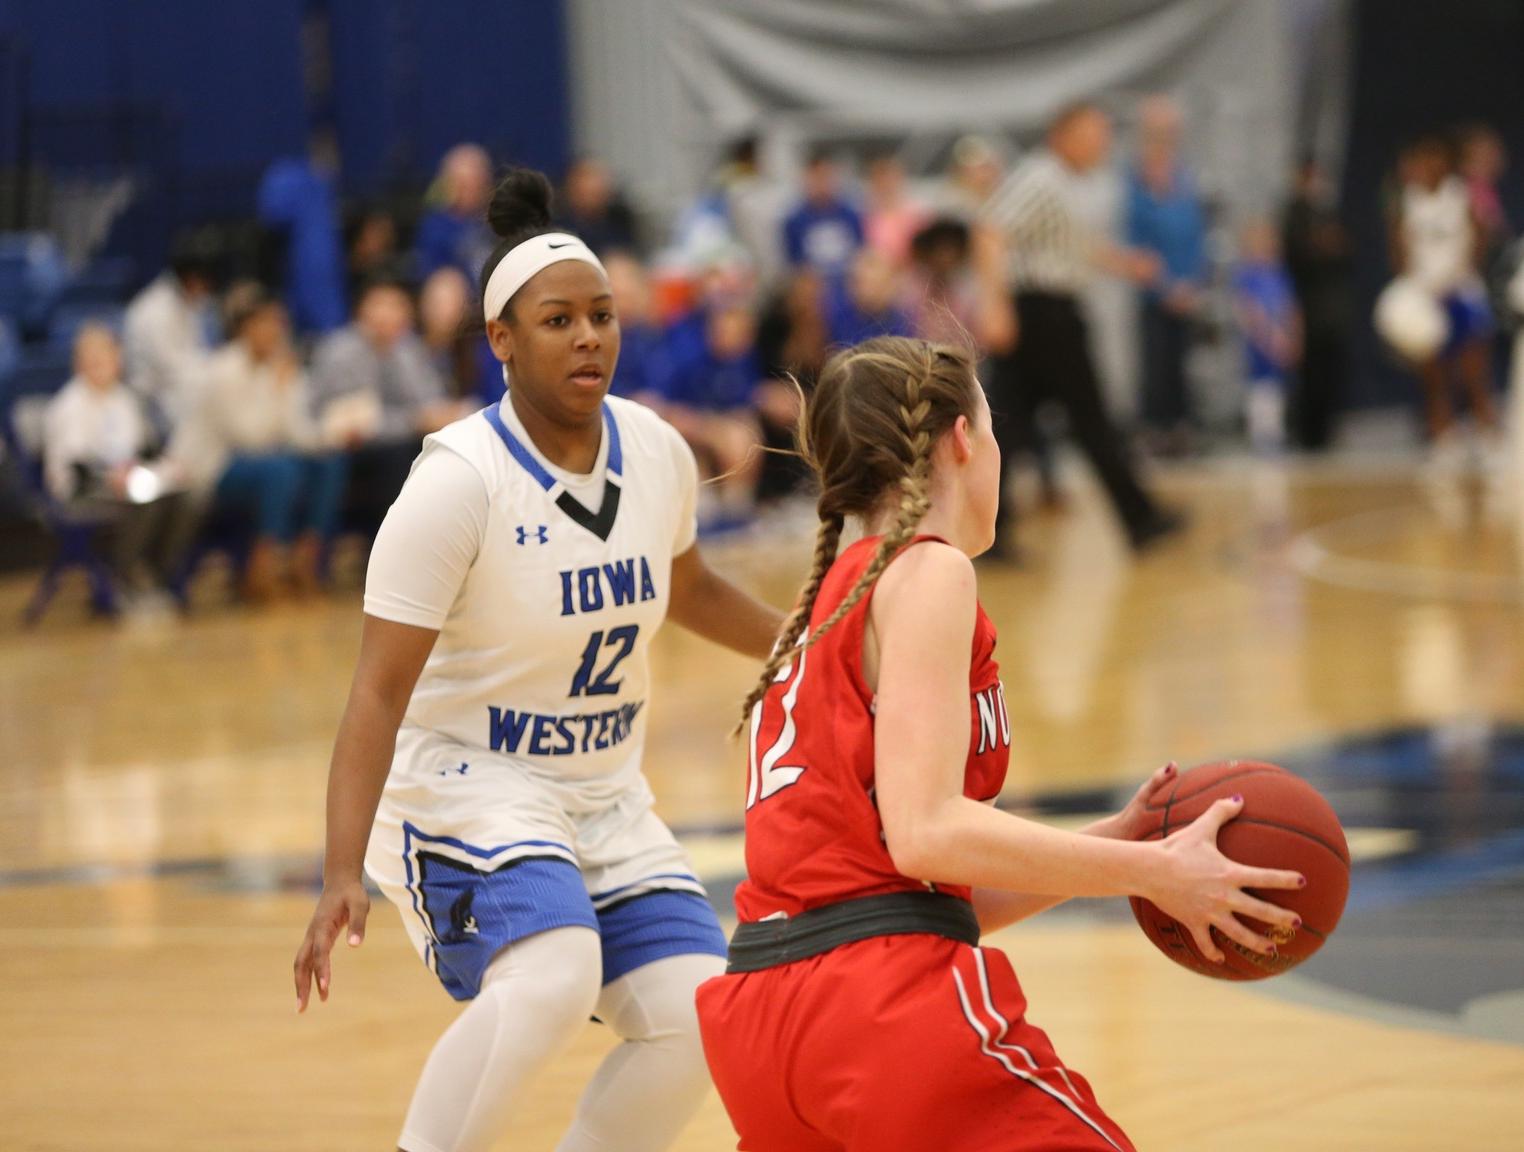 Sophomore guard Azaria Floyd lead the Reivers in scoring with 15 points in the Region XI Championship.